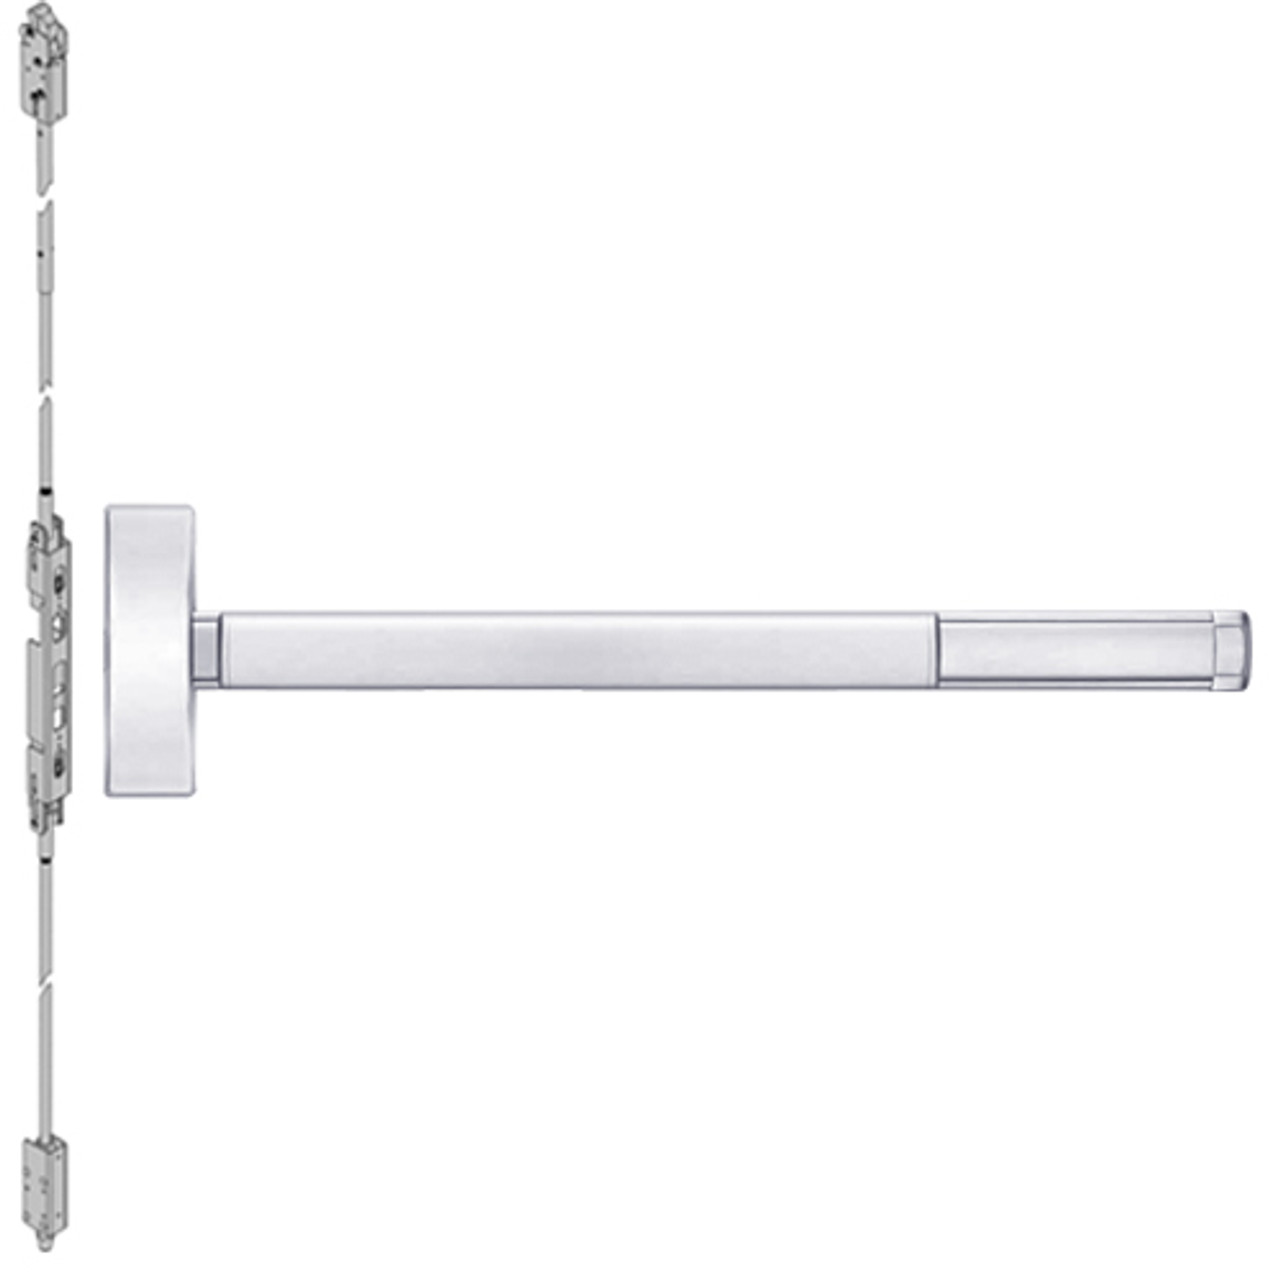 ELRFL2814-625-48 PHI 2800 Series Fire Rated Concealed Vertical Rod Exit Device with Electric Latch Retraction Prepped for Lever-Knob Always Active in Bright Chrome Finish